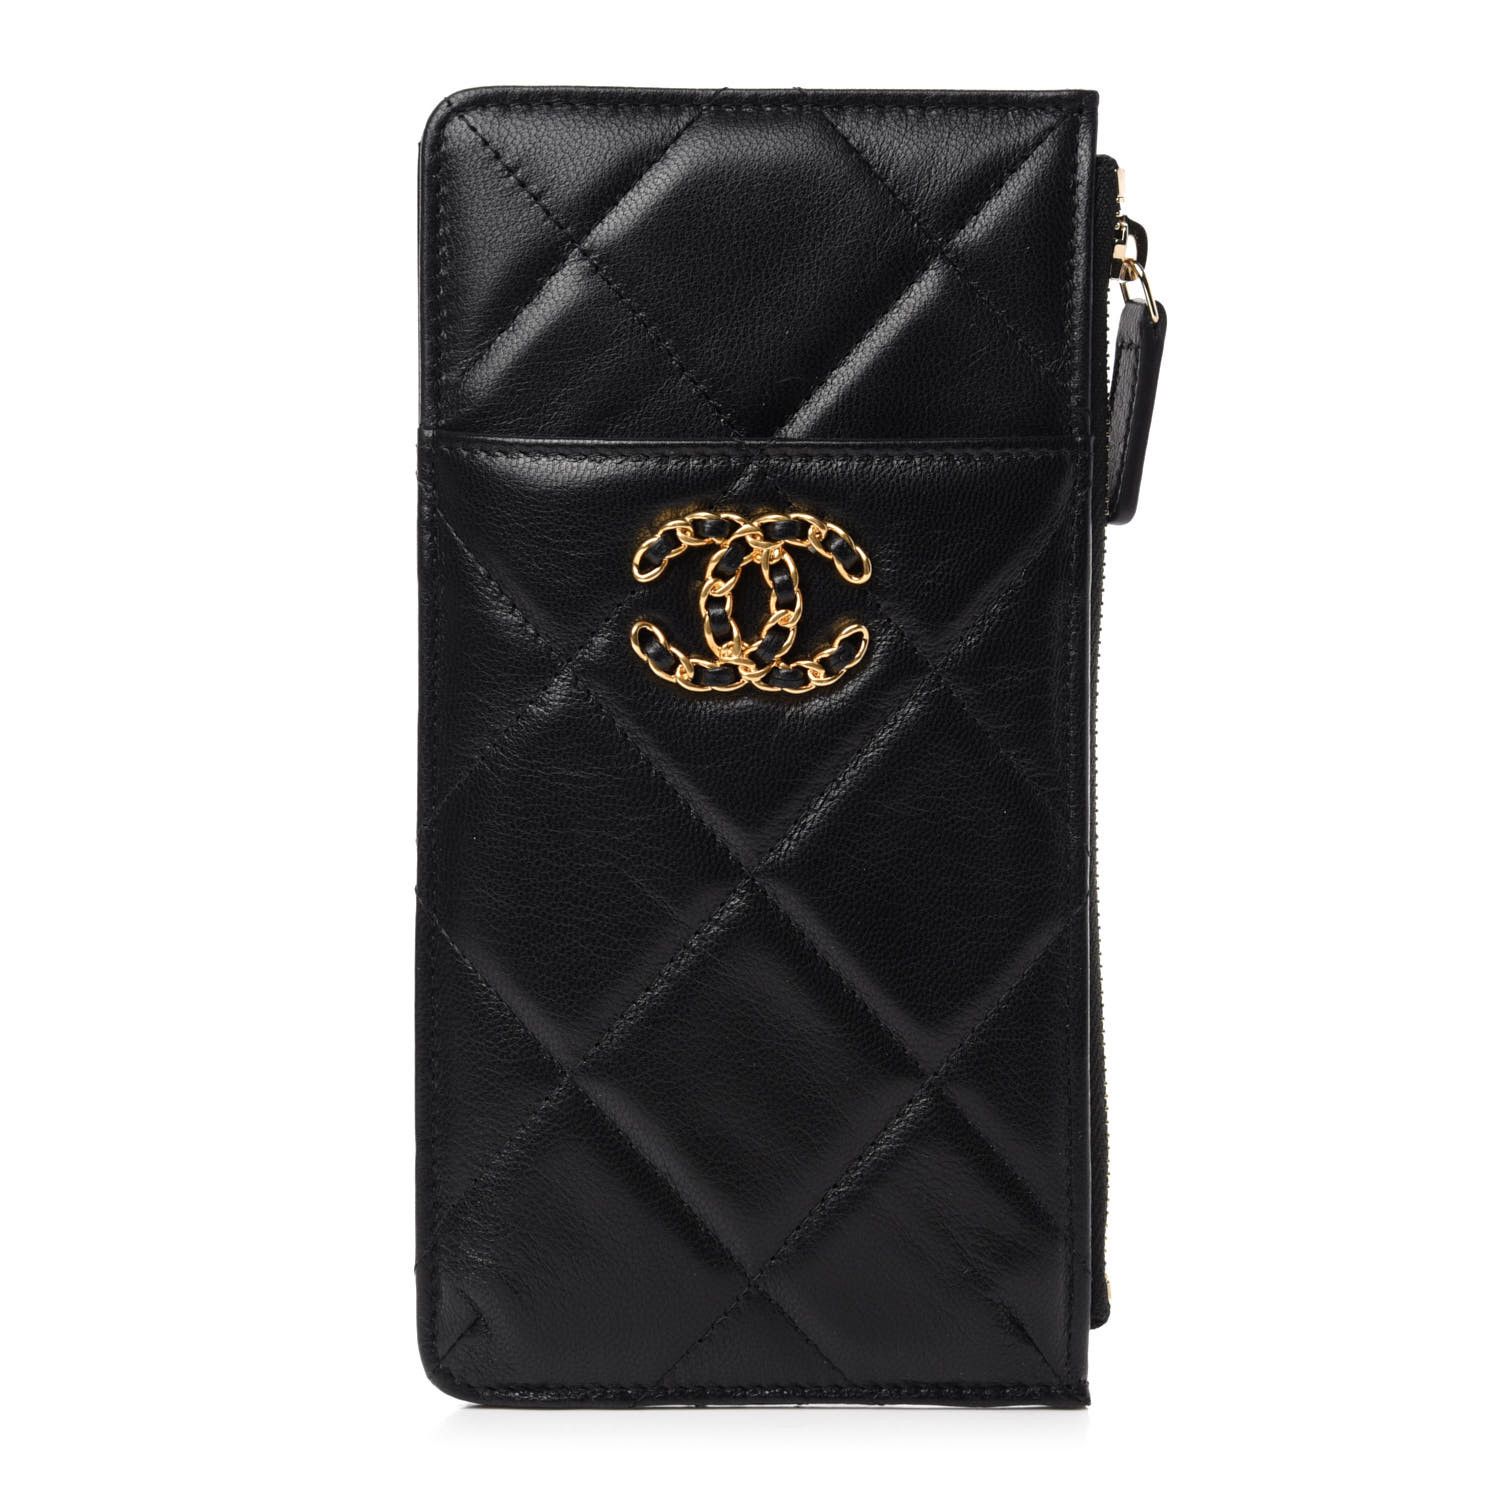 CHANEL

Lambskin Quilted 19 Phone and Card Holder Black | Fashionphile